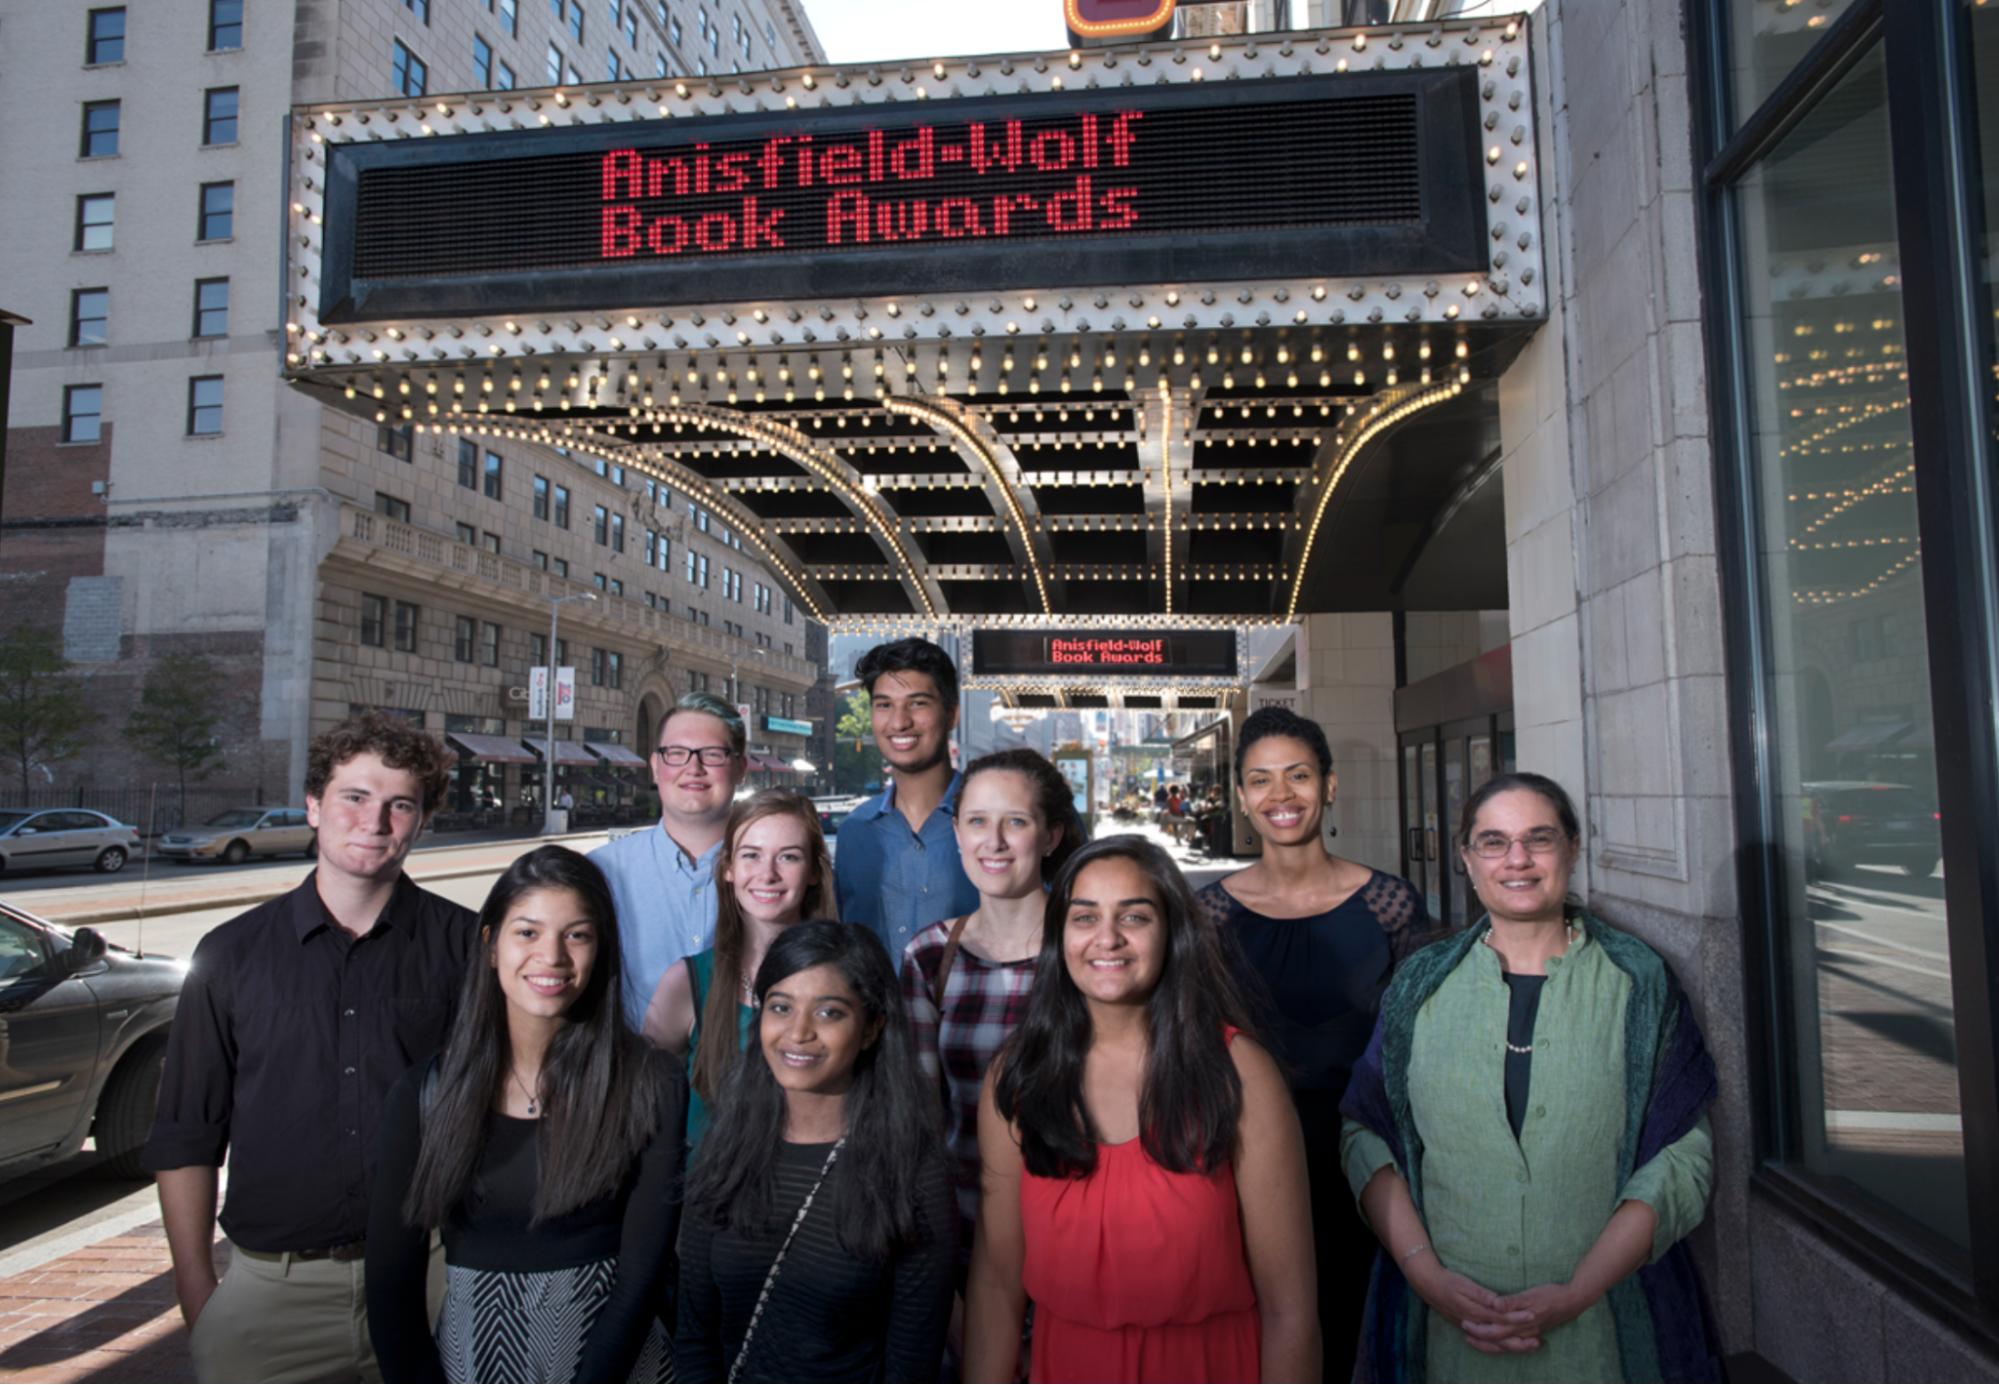 Students and Faculty member in front of marquee sign